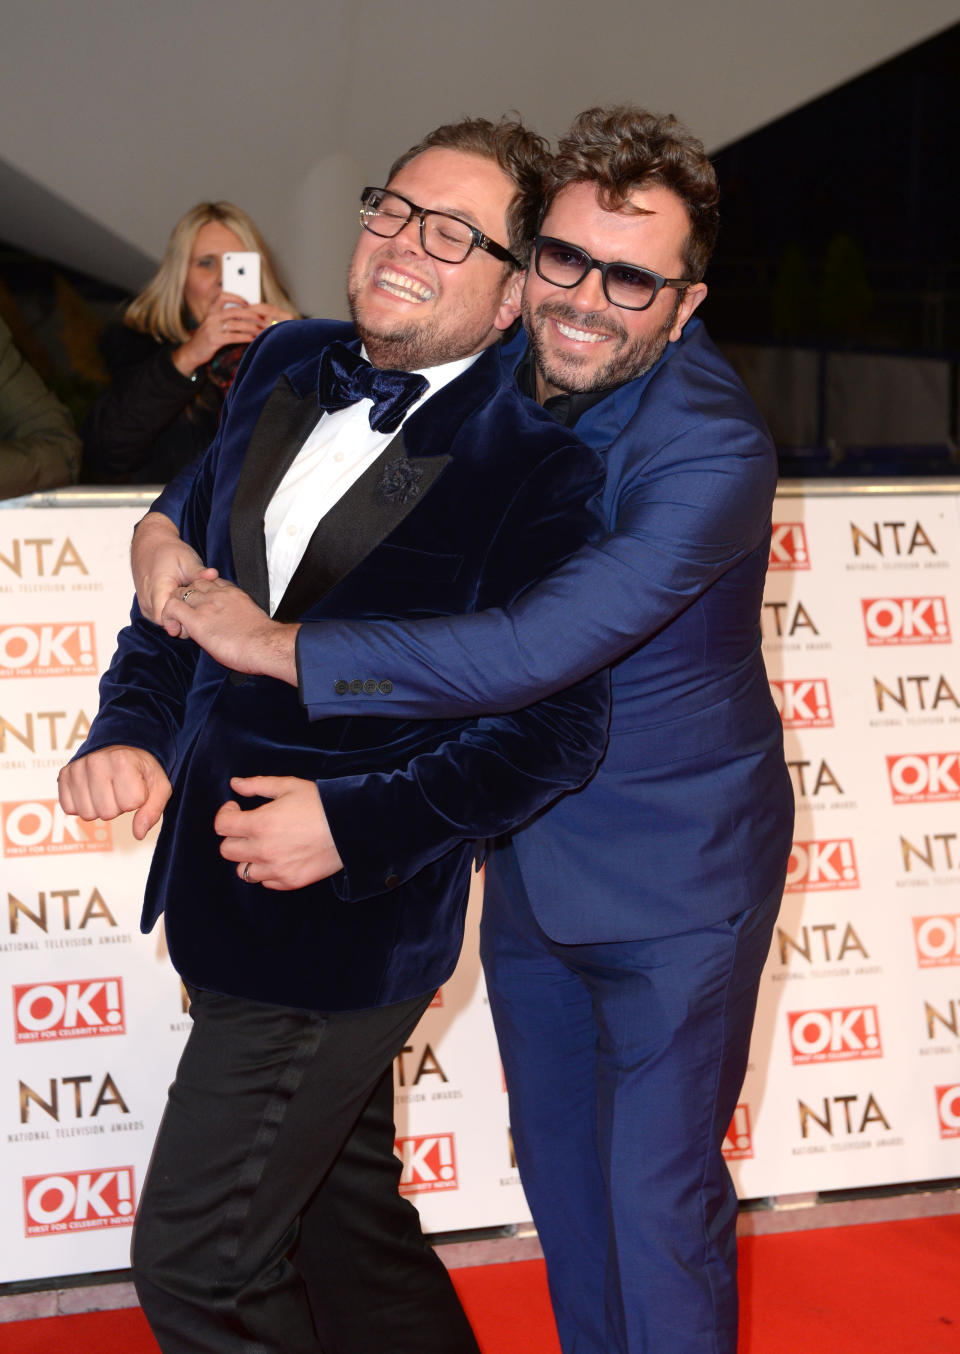 Alan Carr and Paul Drayton on the red carpet at the National Television Awards 2015 held at the O2 Arena, London.

This year the NTA's are celebrating their 20th year.